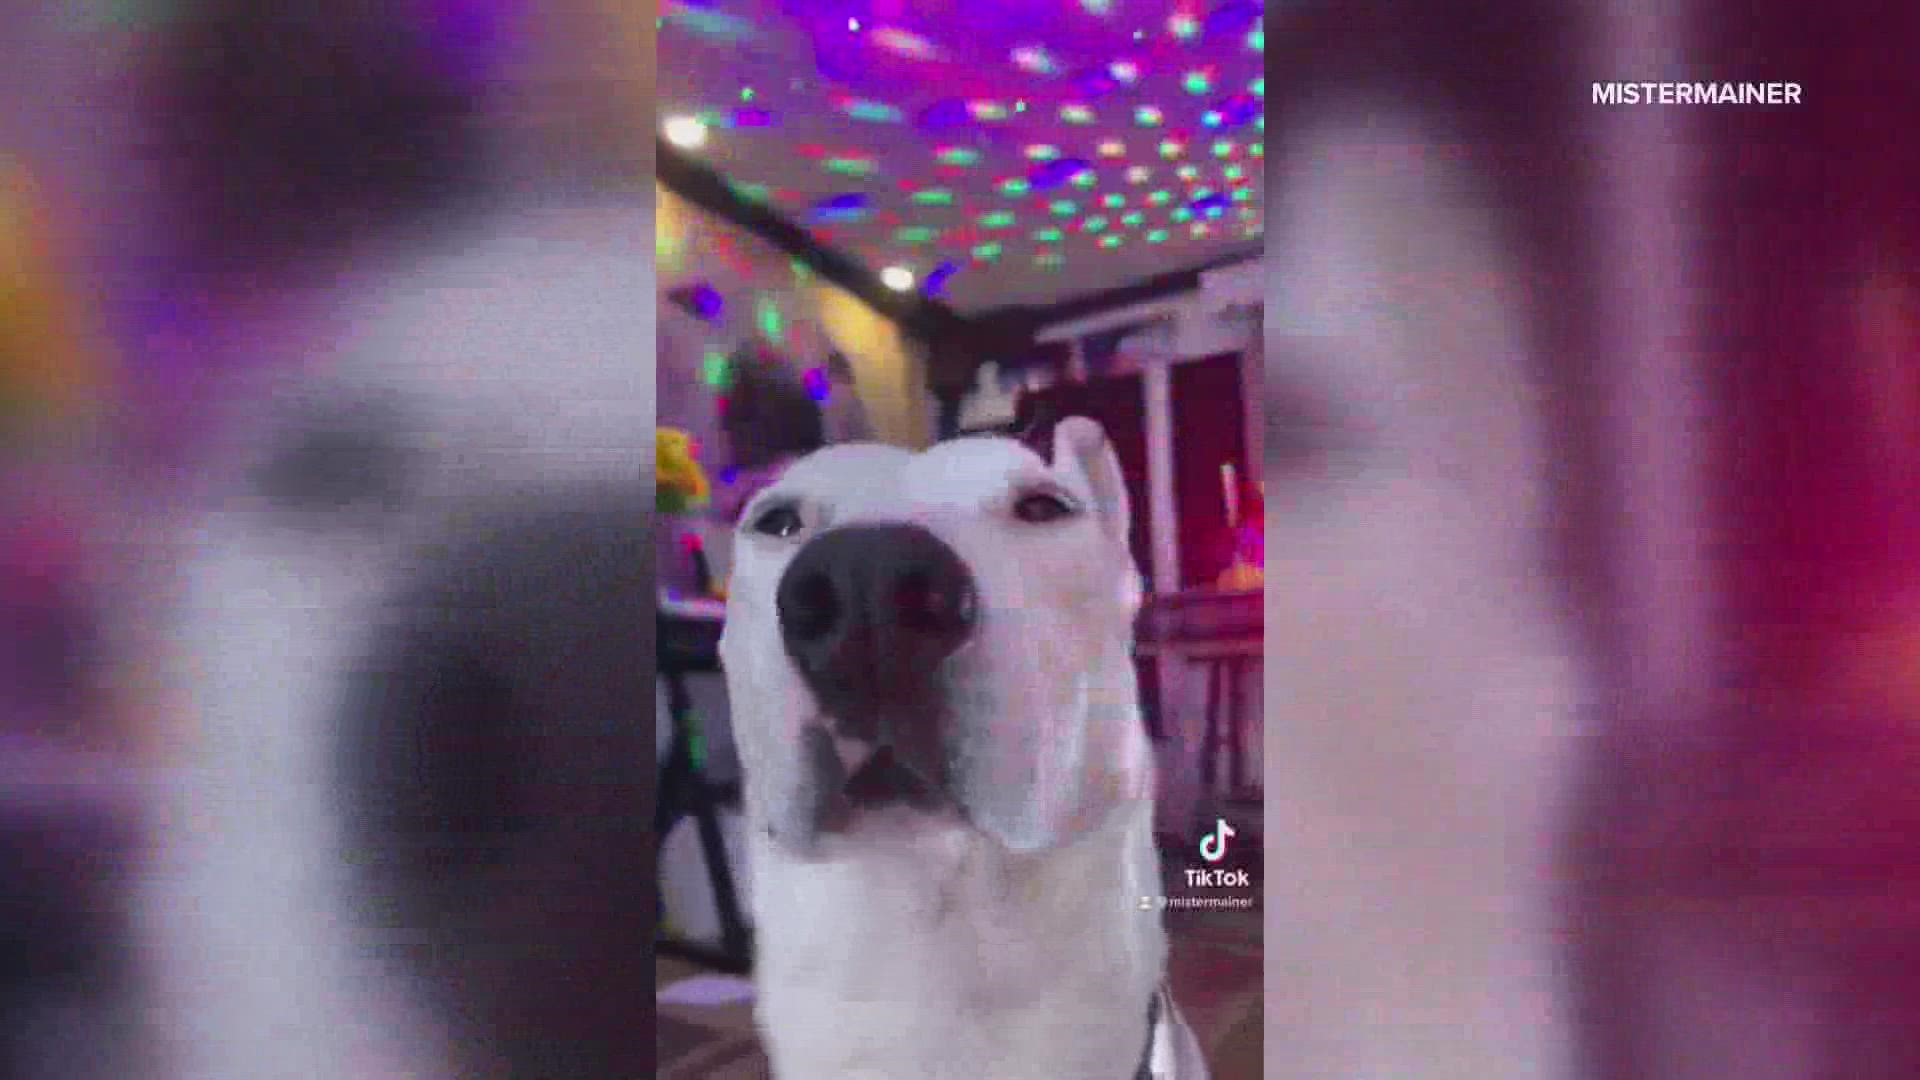 Dmitry Pepper runs one of the most popular TikTok accounts in Maine featuring his dog Biscuit under the handle MisterMainer.